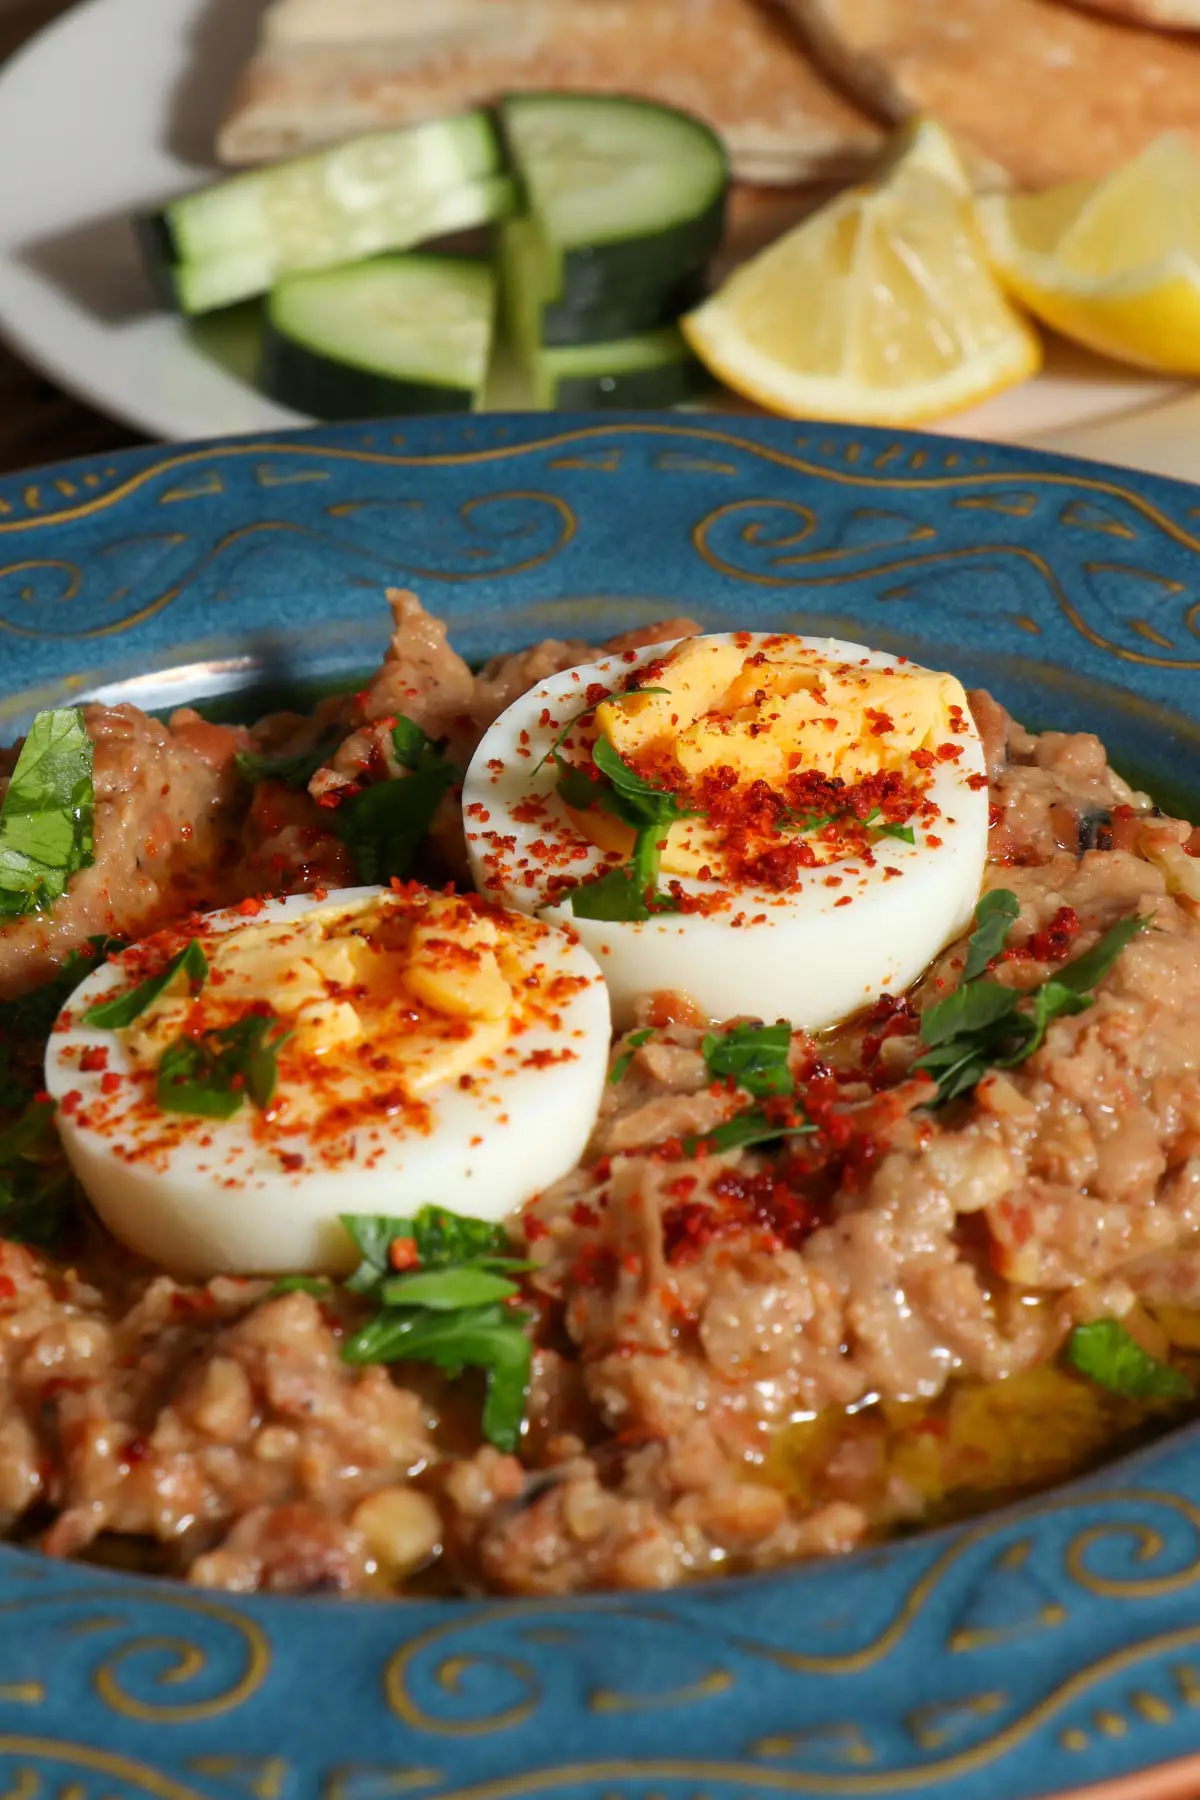 A blue patterned bowl containing foul which is made of mashed fava beans topped with olive oil, minced parsley, hard boiled eggs, and Aleppo pepper. There is a white plate in the background with sliced cucumber, pita bread, and lemon wedges.